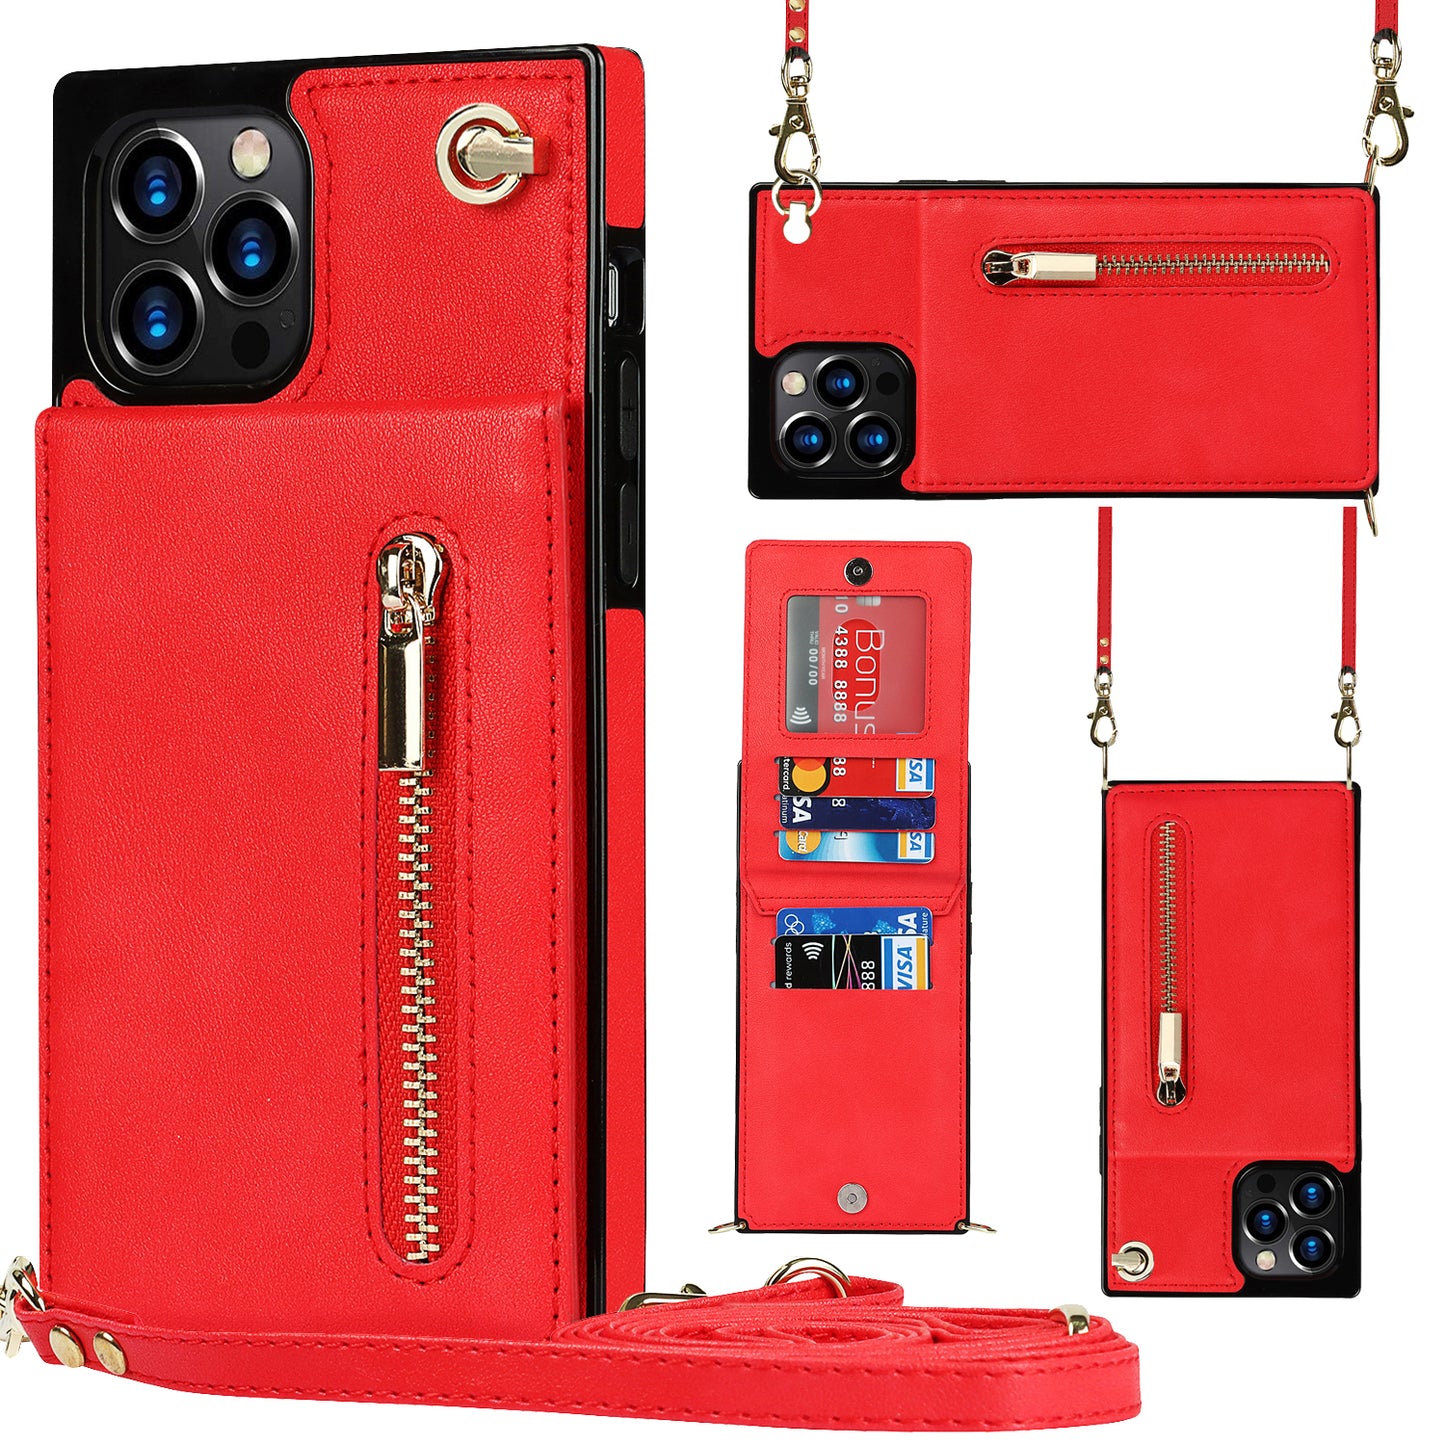 Apple iPhone 12 Pro Leather Cover with Classical Card Cash Slots Zipper Hand Shoulder Strap Kickstand